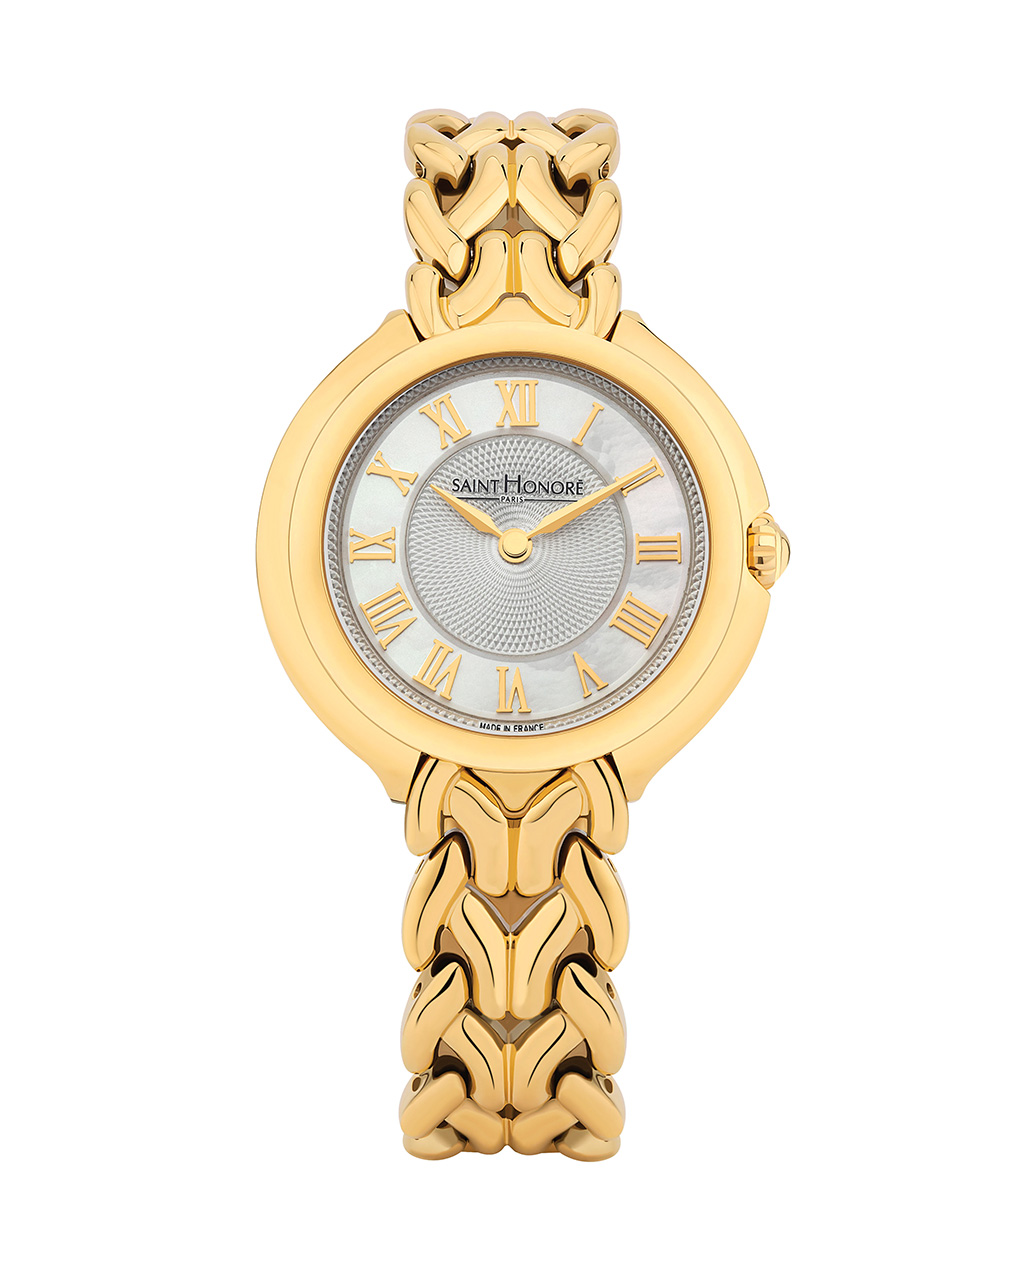 DIVINE Women's watch - ion plating gold, white dial, metal strap